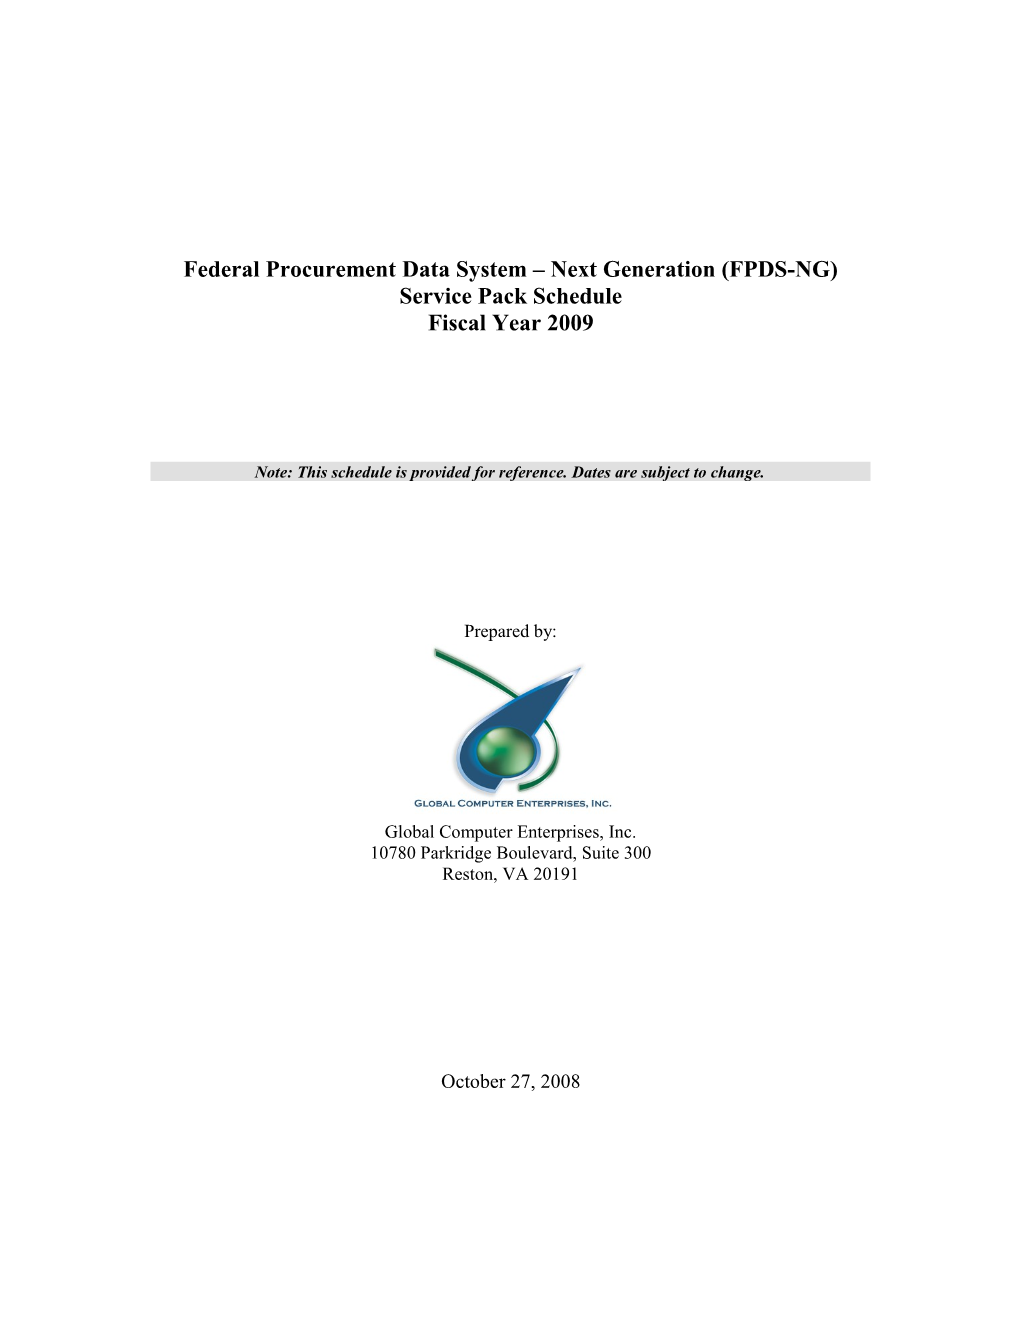 Federal Procurement Data System Next Generation (FPDS-NG)